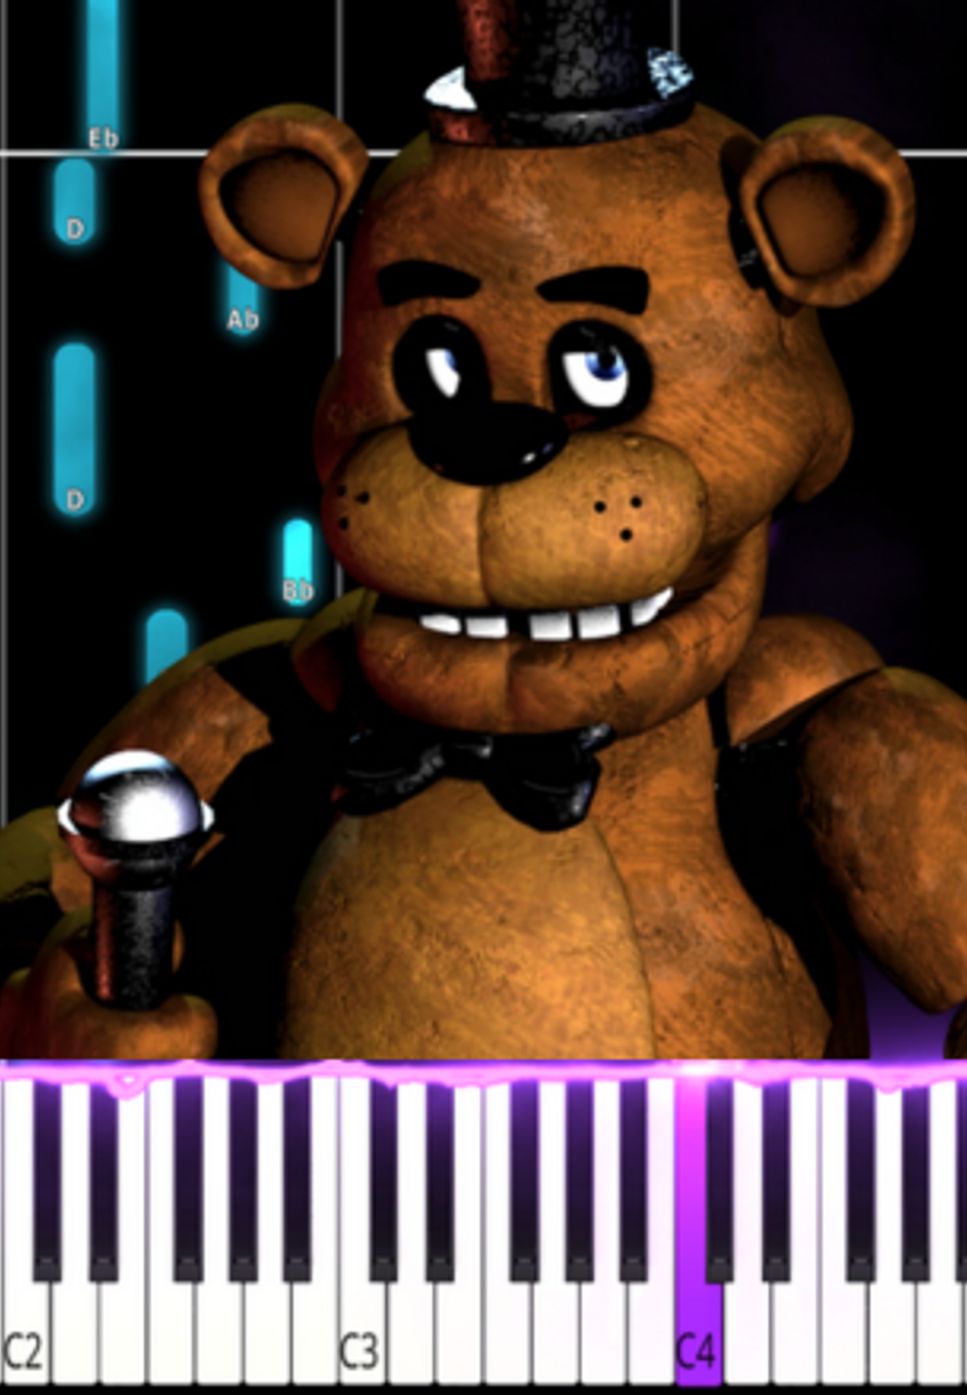 Five Nights at Freddy's 2 - It's been so long by Marco D.